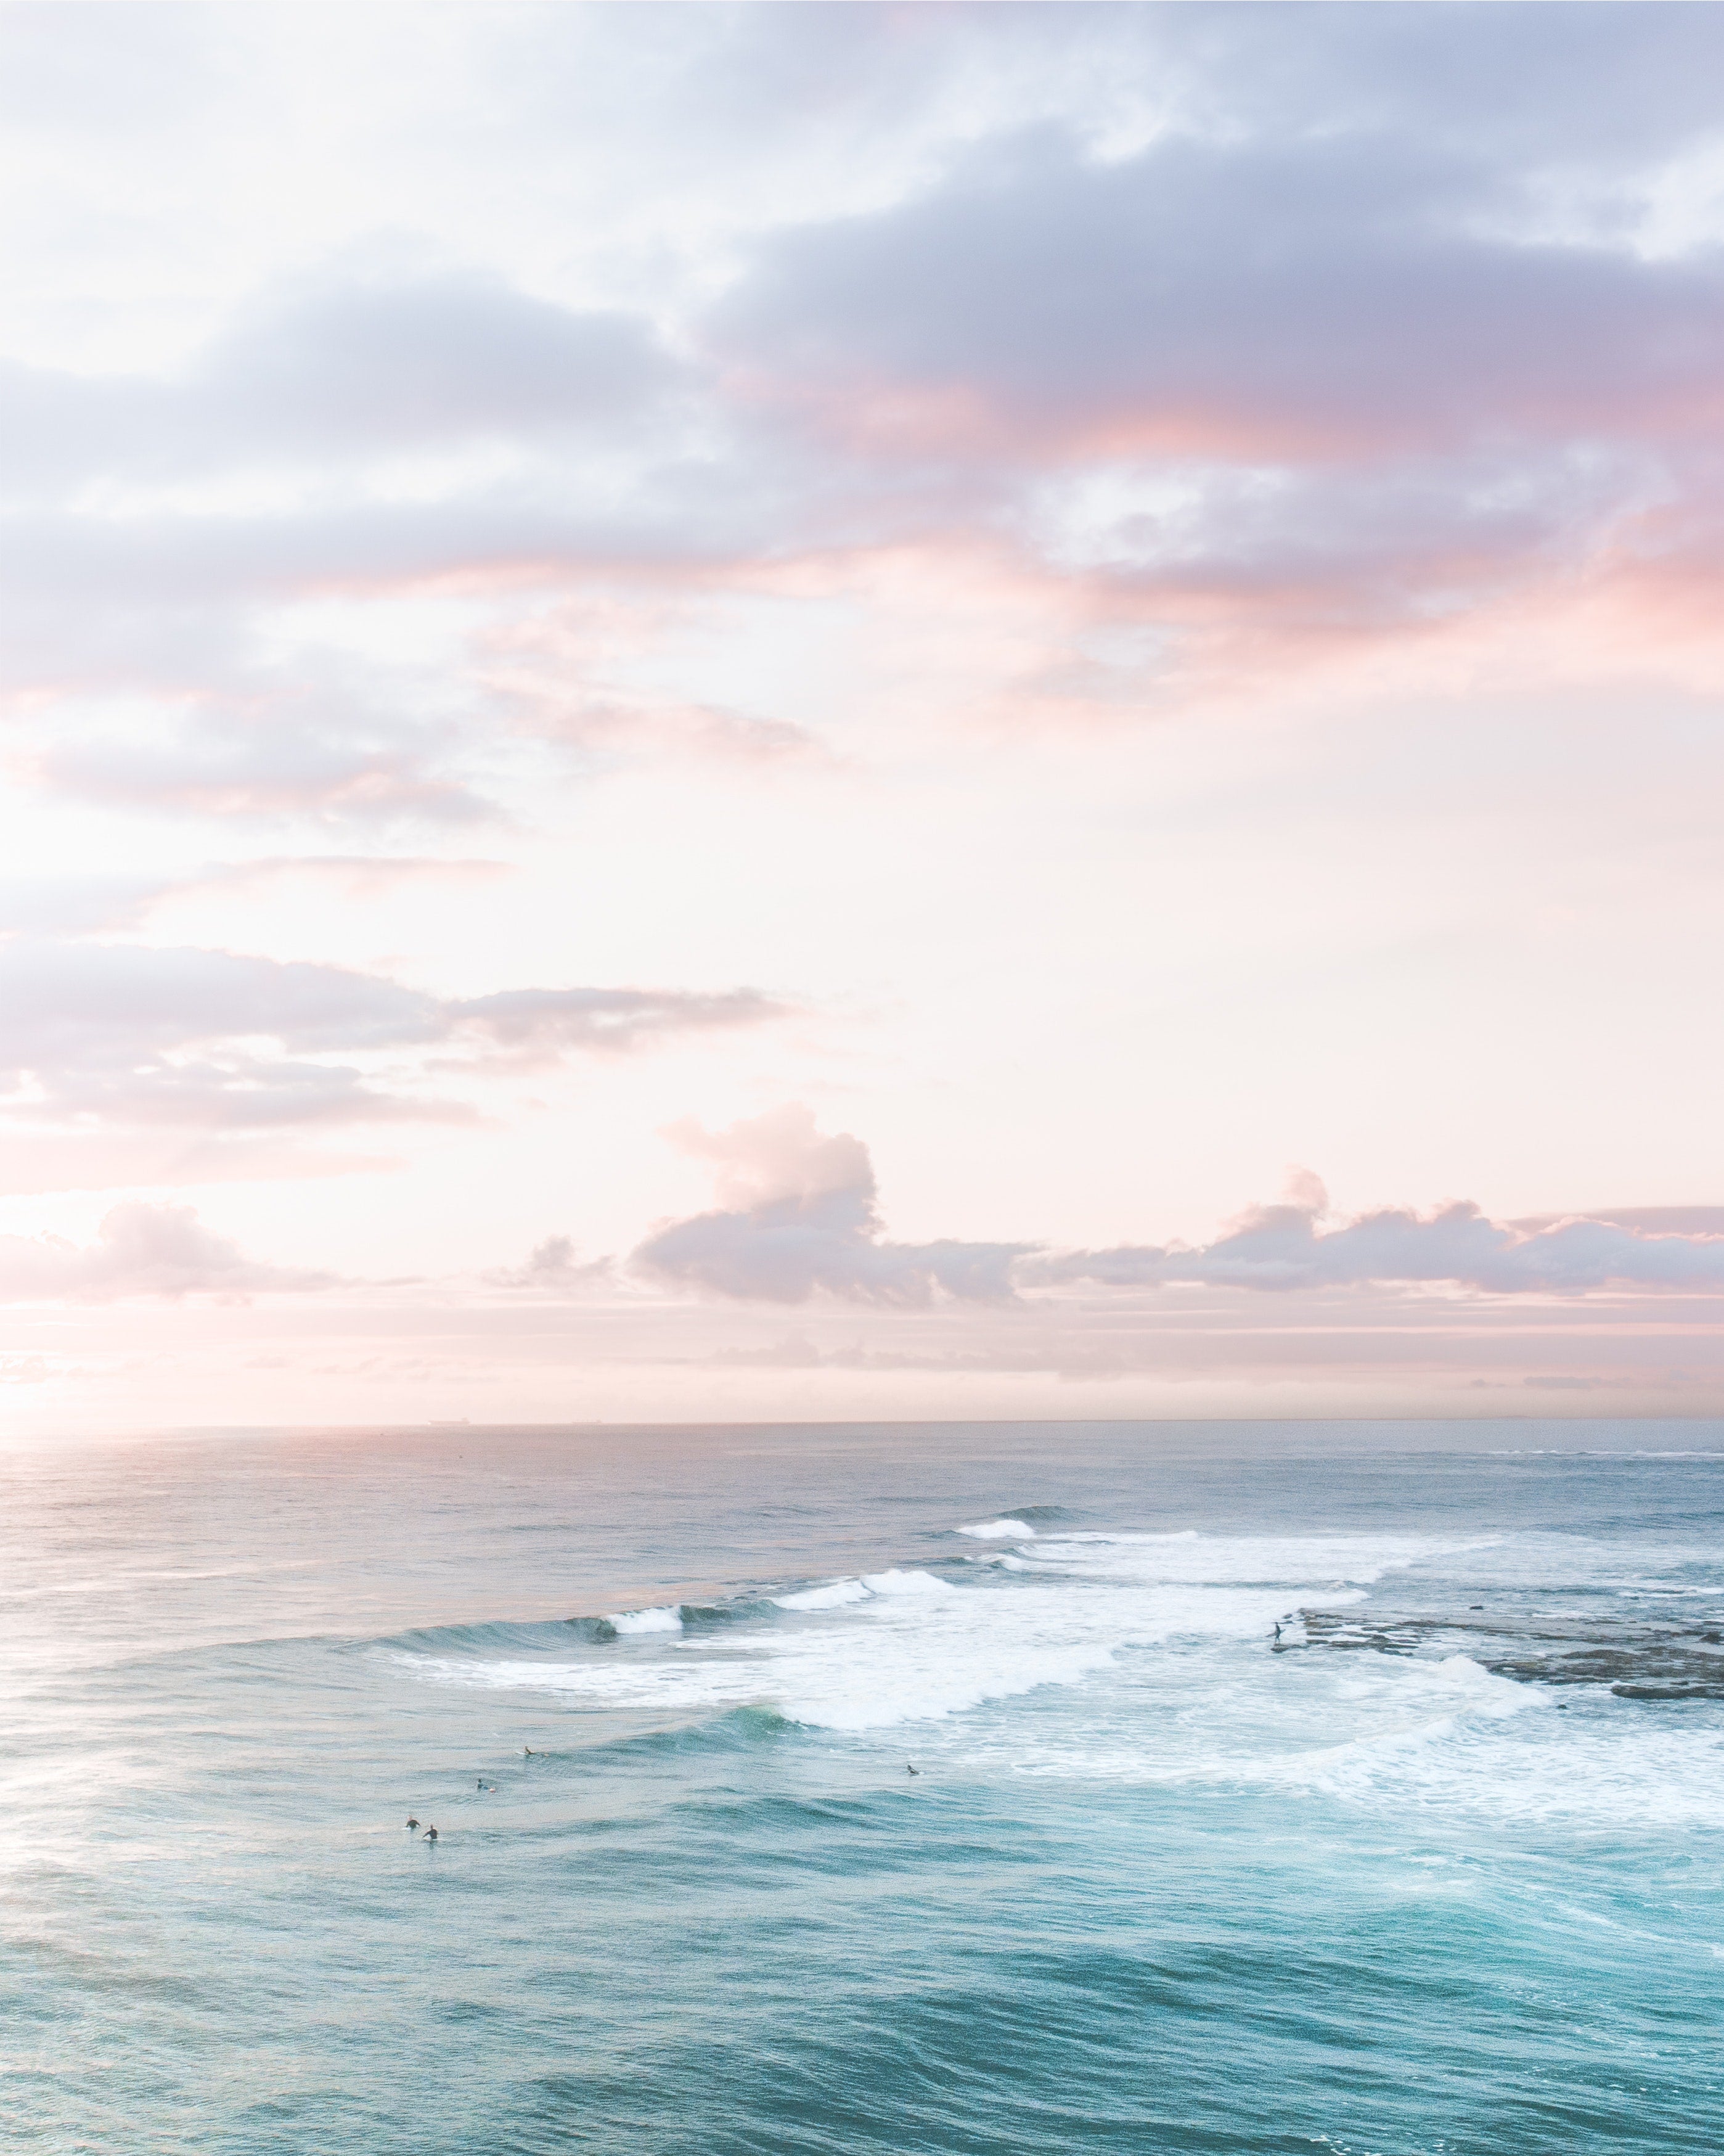 Aerial image of the ocean at sunrise with surfers